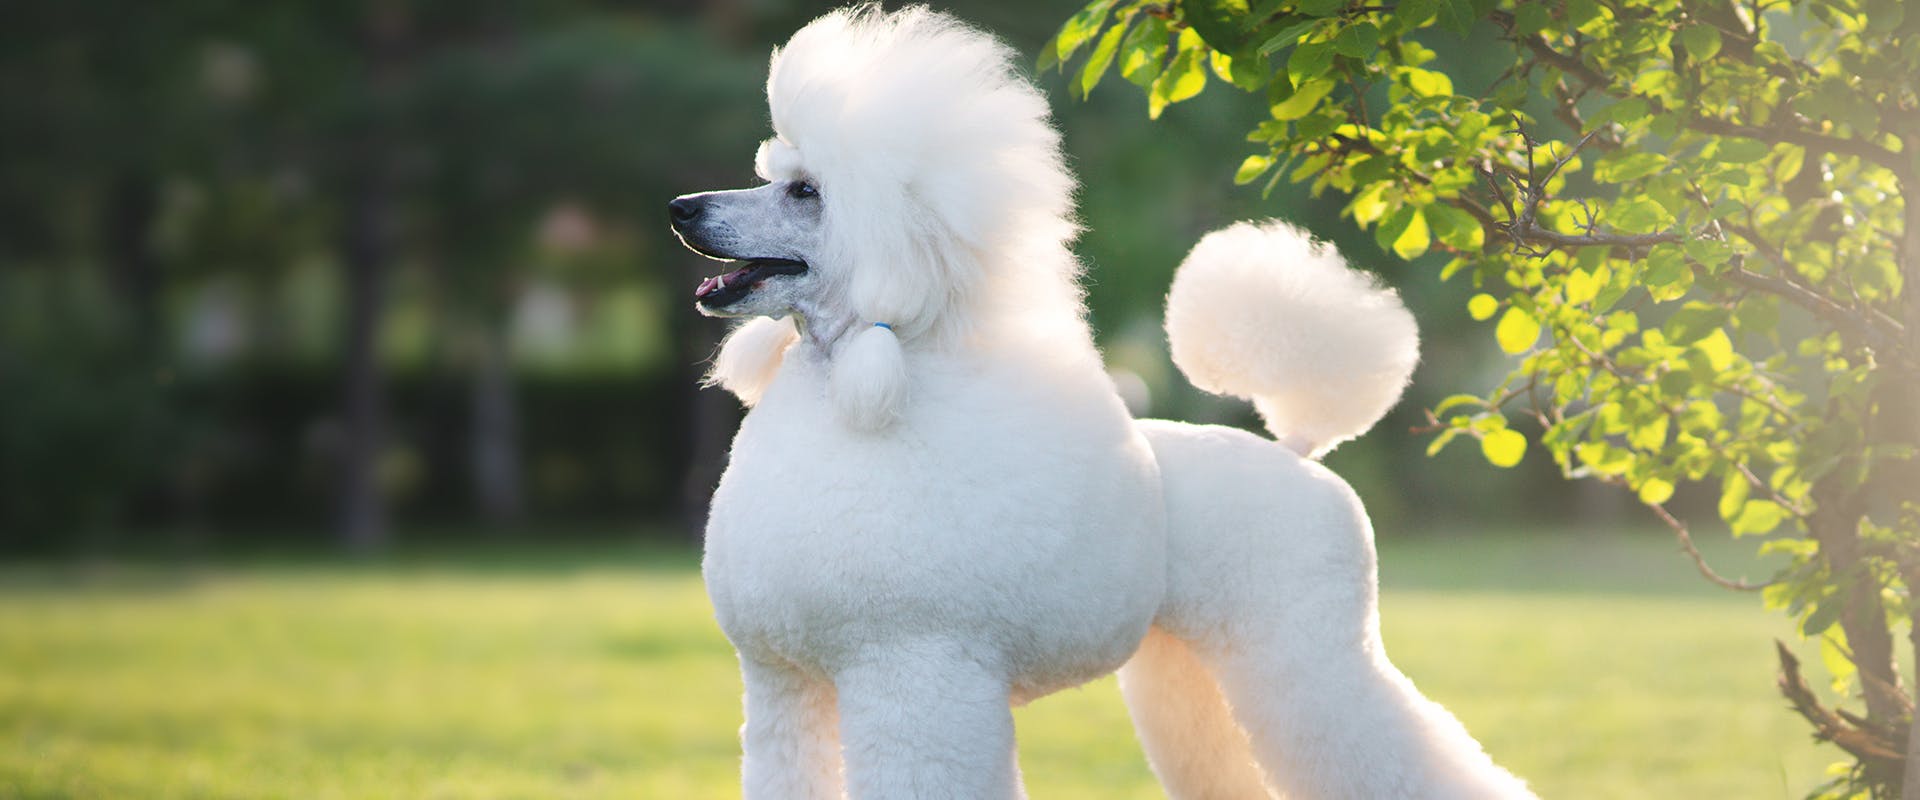 A fluffy Poodle in the park